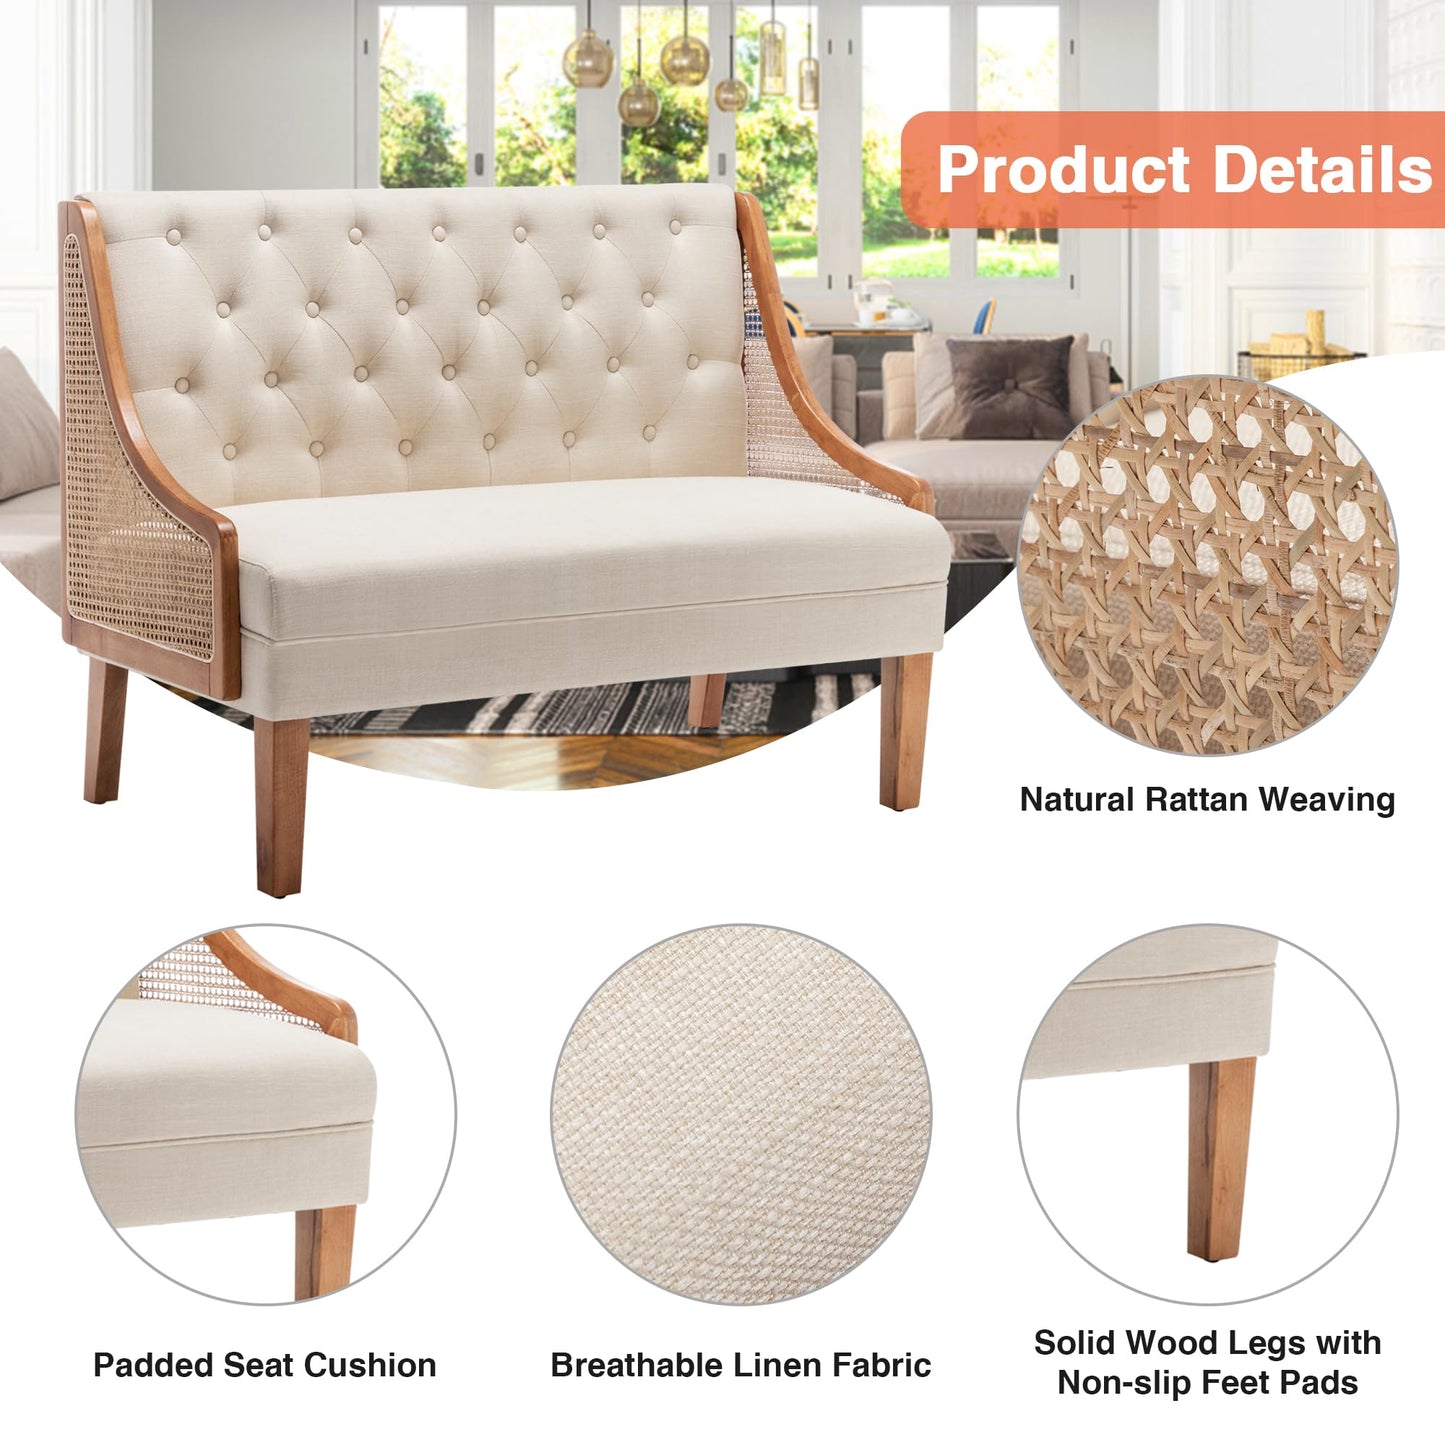 Yongqiang Modern Settee with Back Small Loveseat Sofa Rattan Upholstered Dining Banquette Seating for Kitchen Dining Room Living Room Linen Button Tufted Mini Couch